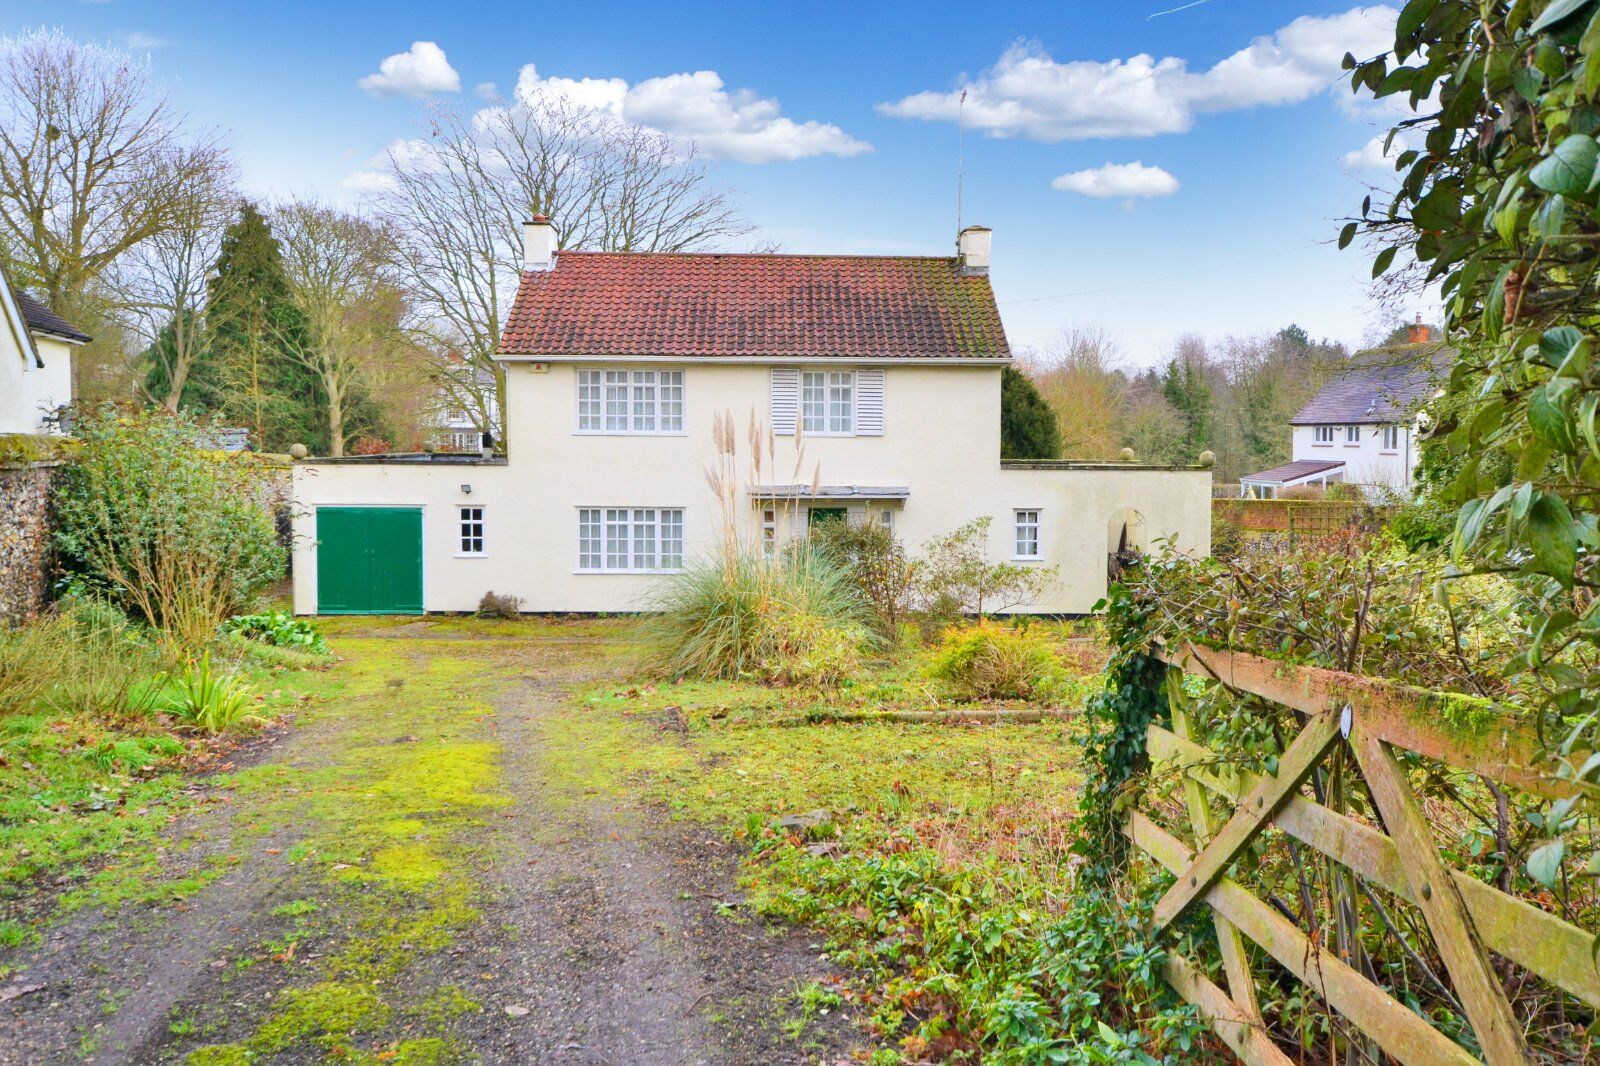 3 bedroom detached house for sale Bardfield Road, Finchingfield, CM7, main image